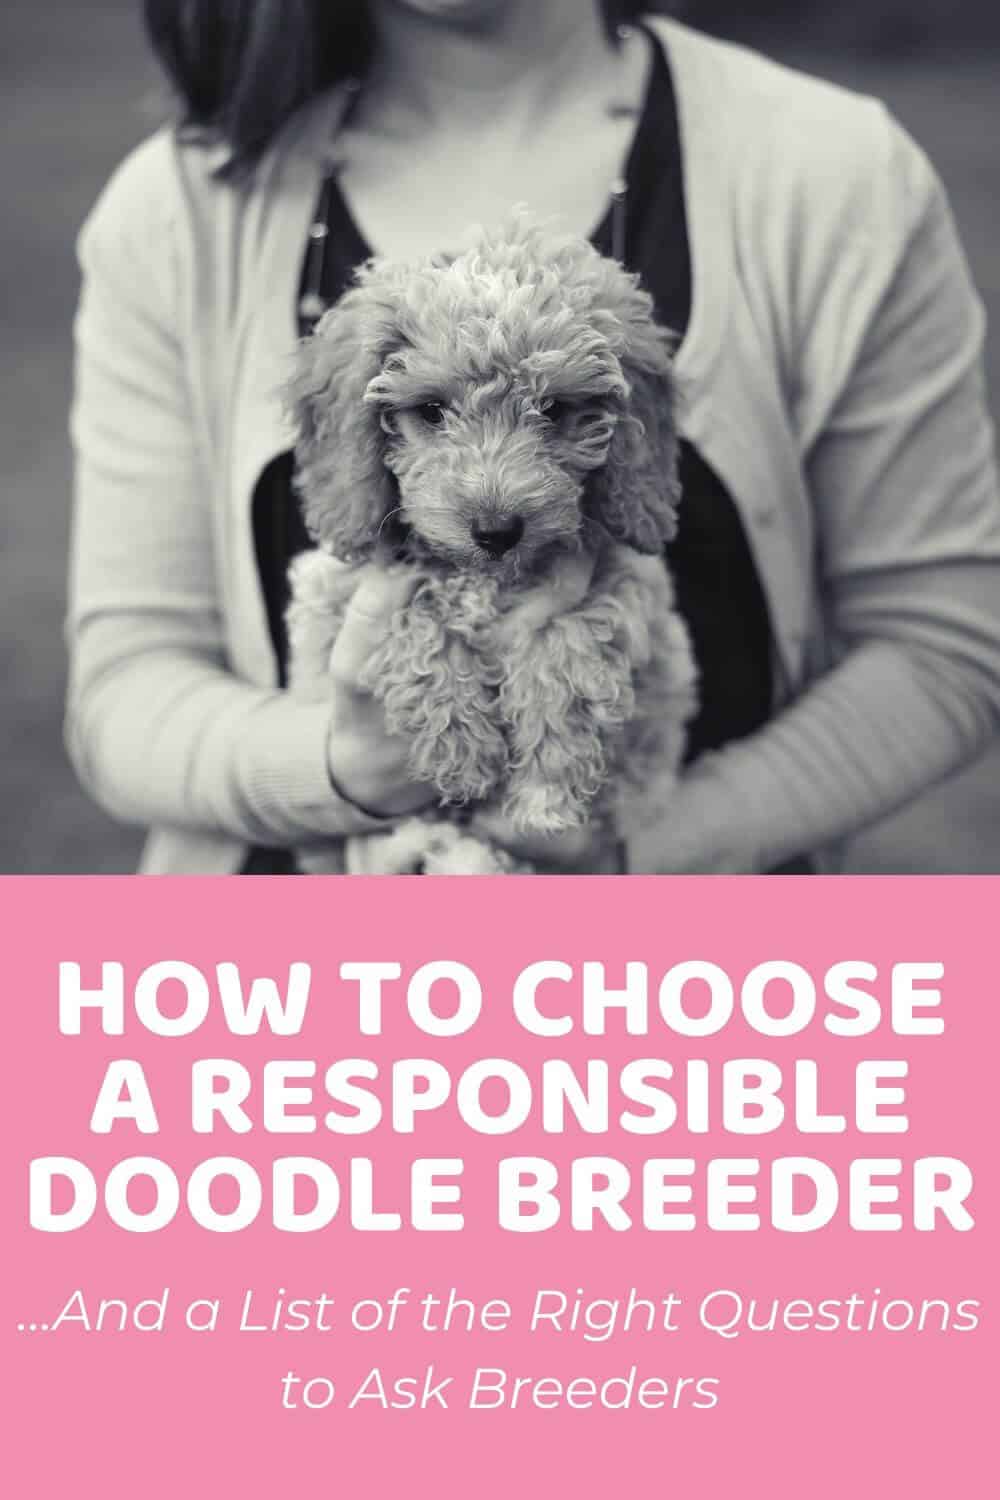 Cavapoo Price: How Much Do They Cost? Factors and ...